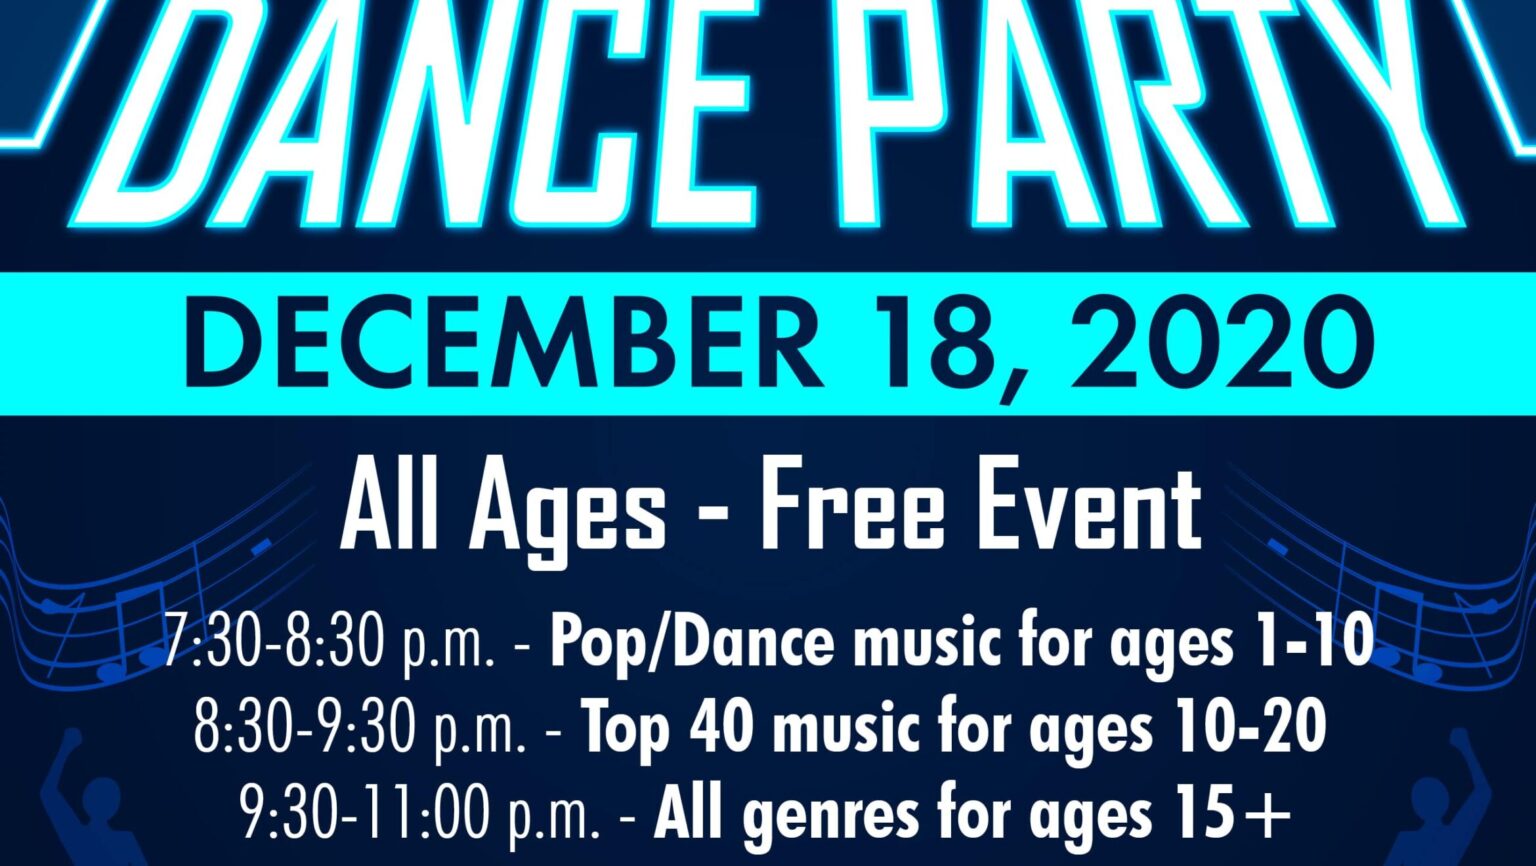 Virtual Dance Party for DSAO event, December 18, 2020.